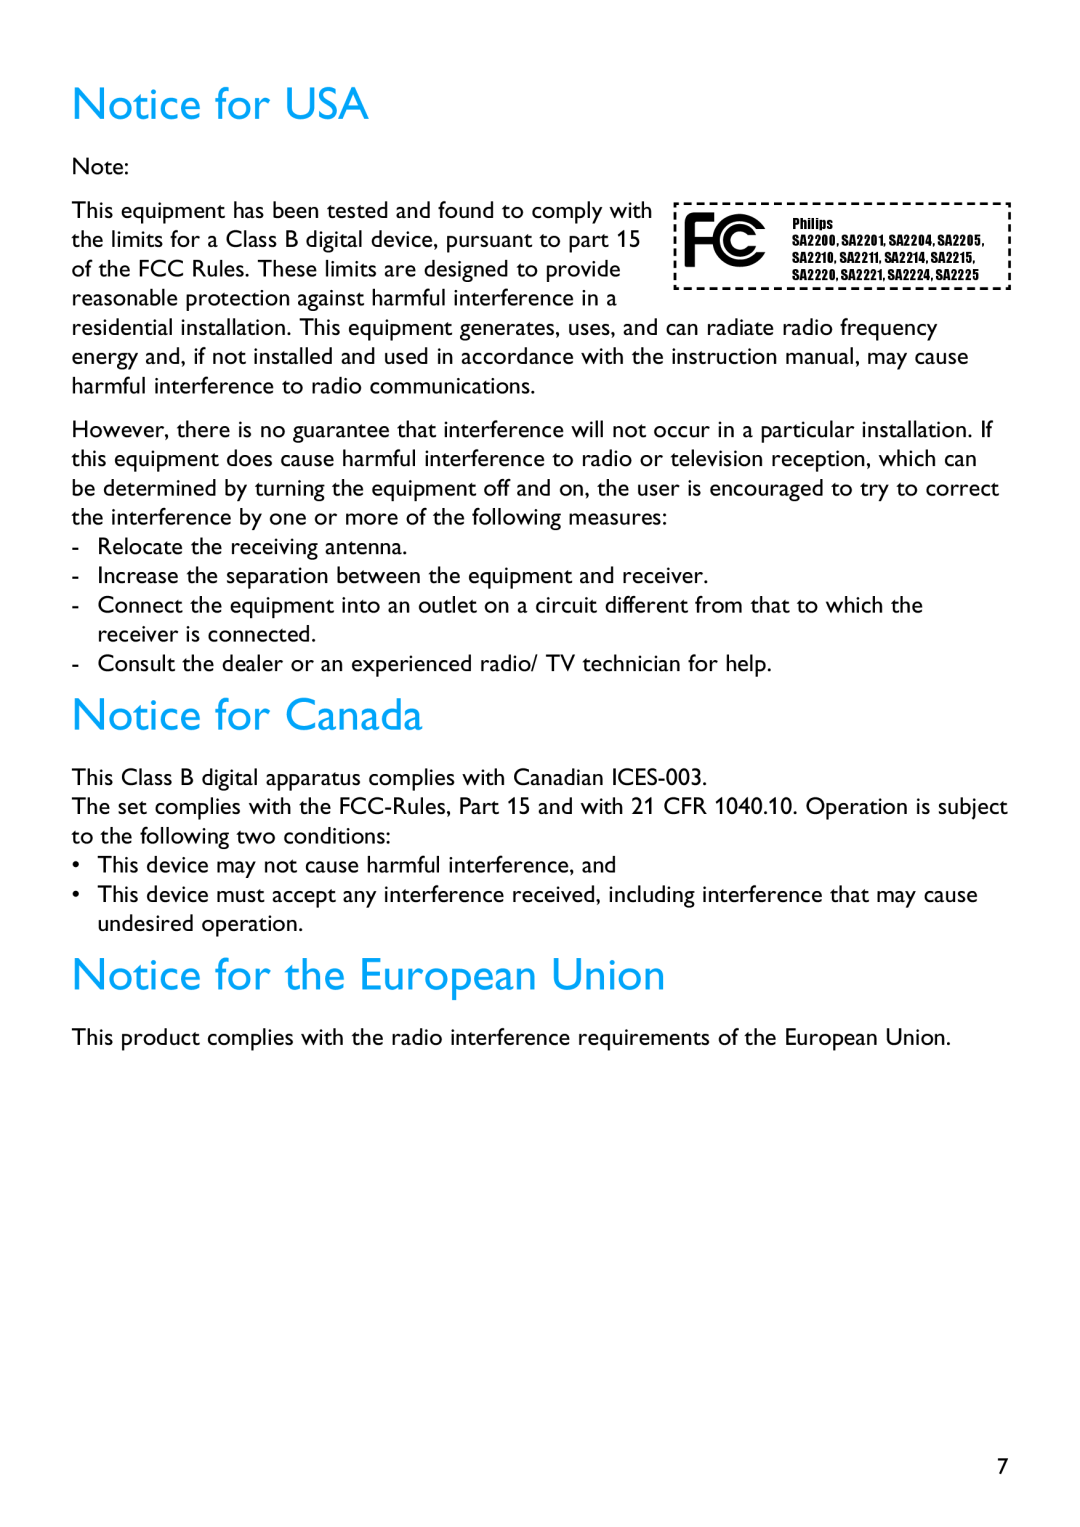 Philips SA2200 manual Notice for USA, Notice for Canada, Notice for the European Union 